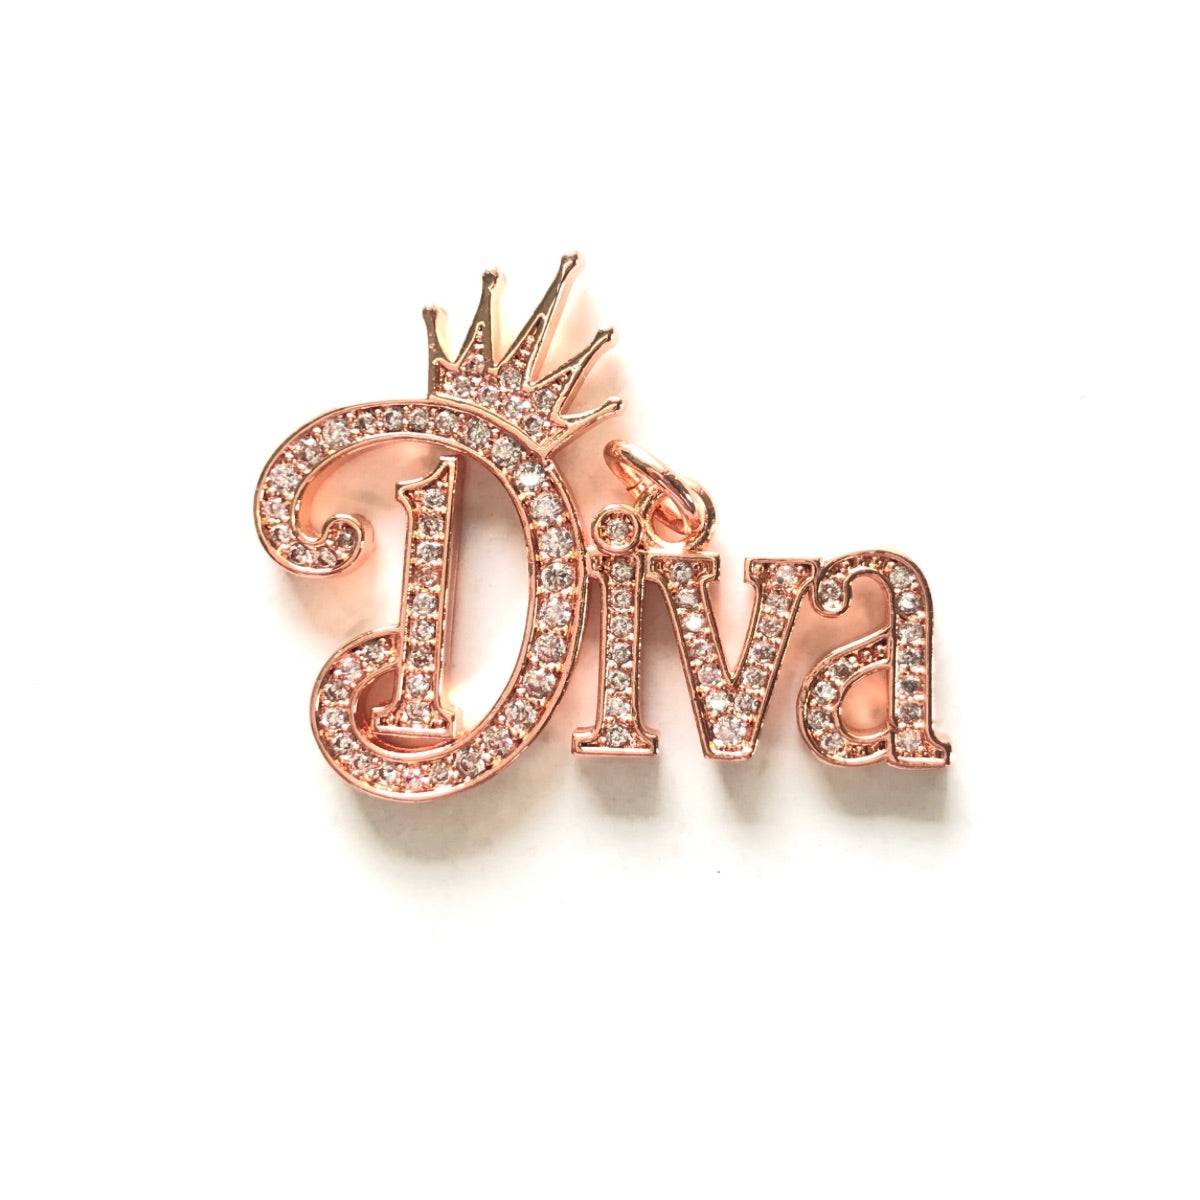 10pcs/lot 34*26.5mm CZ Pave Crown DIVA Word Charms Rose Gold CZ Paved Charms Crowns New Charms Arrivals Words & Quotes Charms Beads Beyond